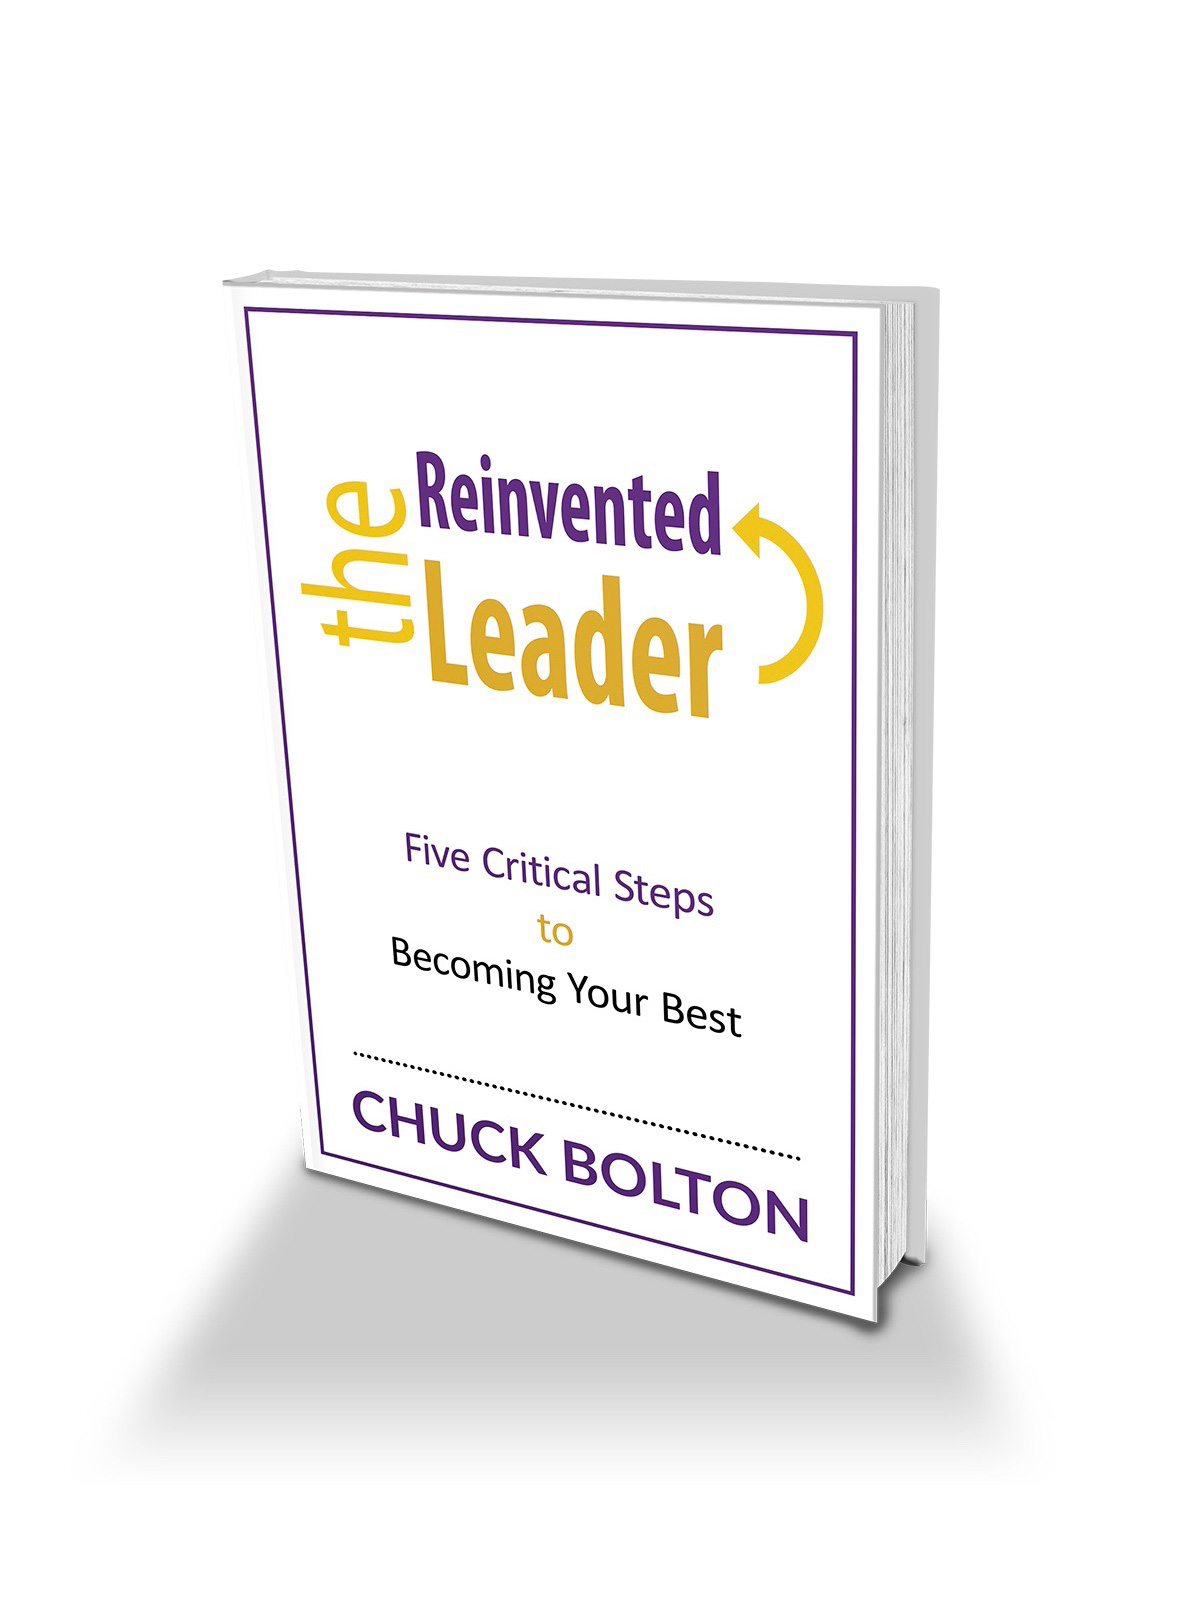 The Reinvented Leader - Bestselling Book by Executive Coach Chuck Bolton